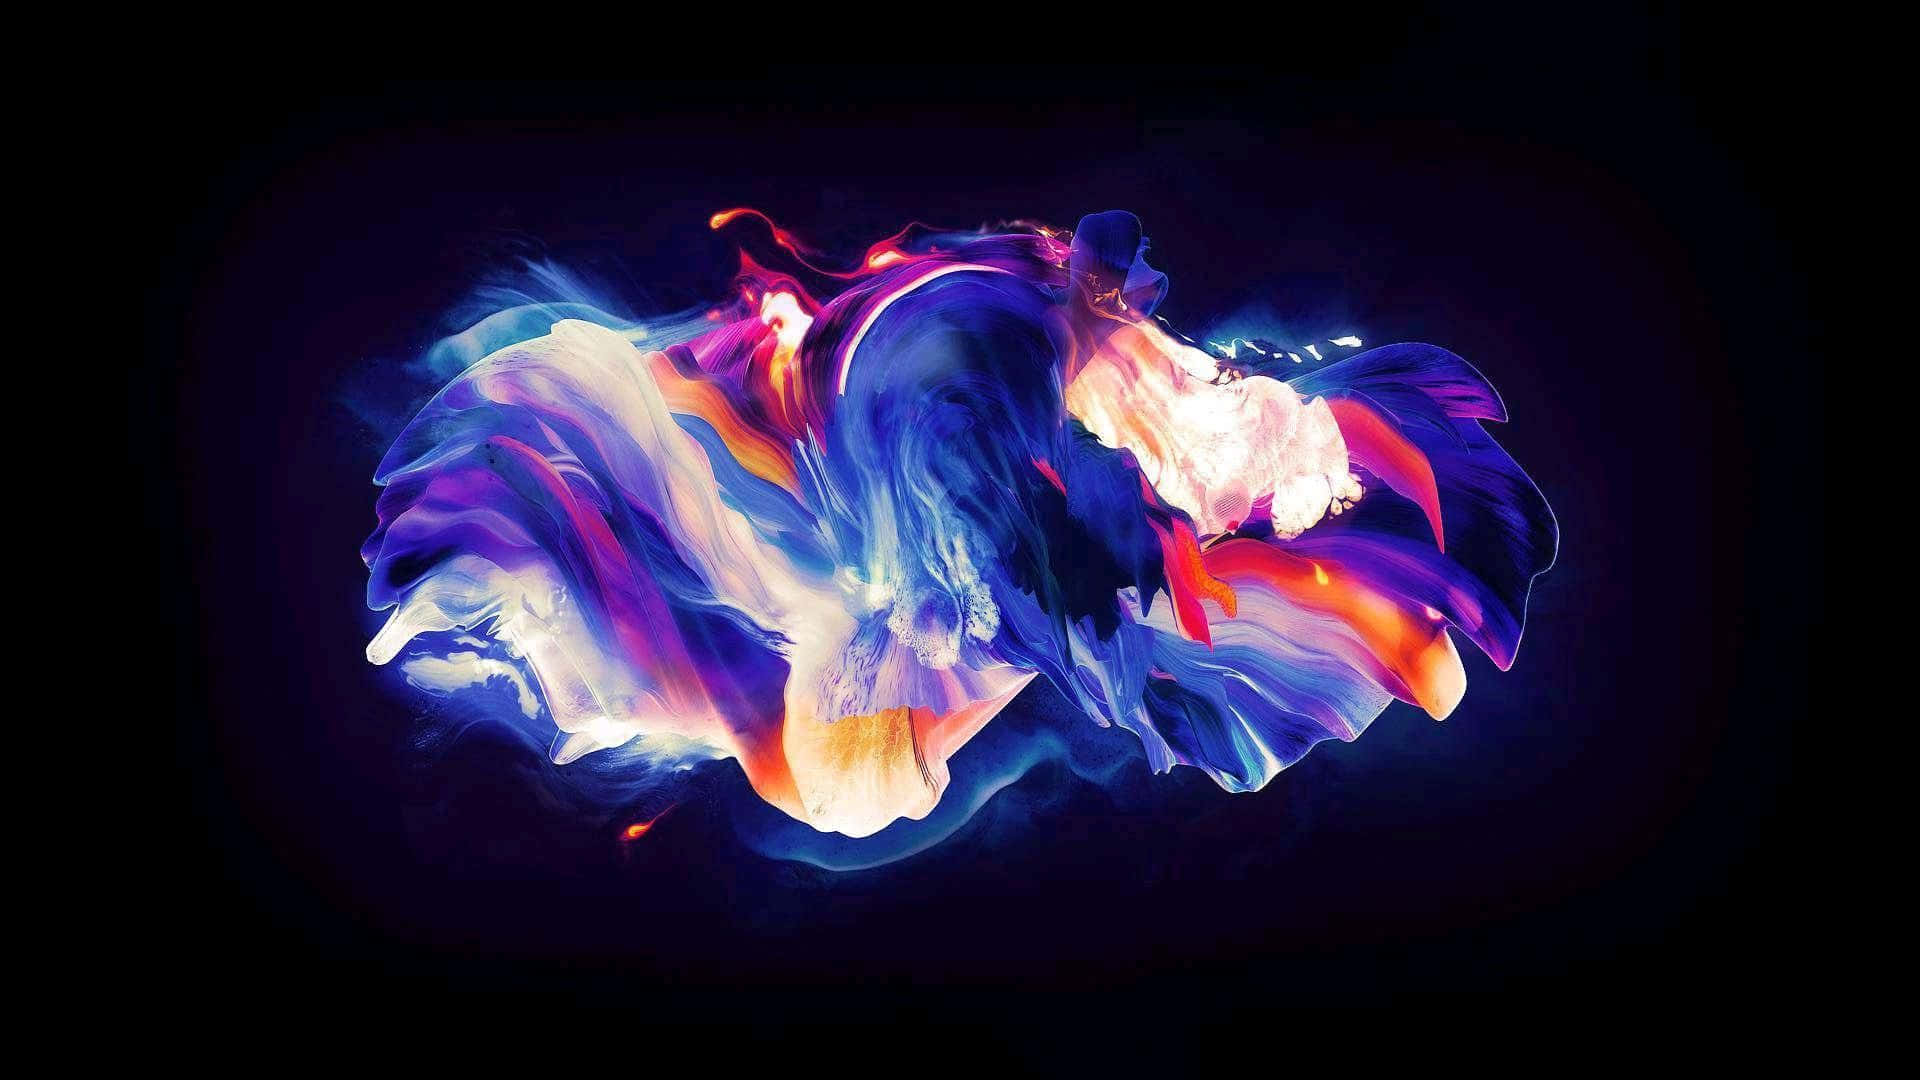 A Colorful Abstract Painting On A Black Background